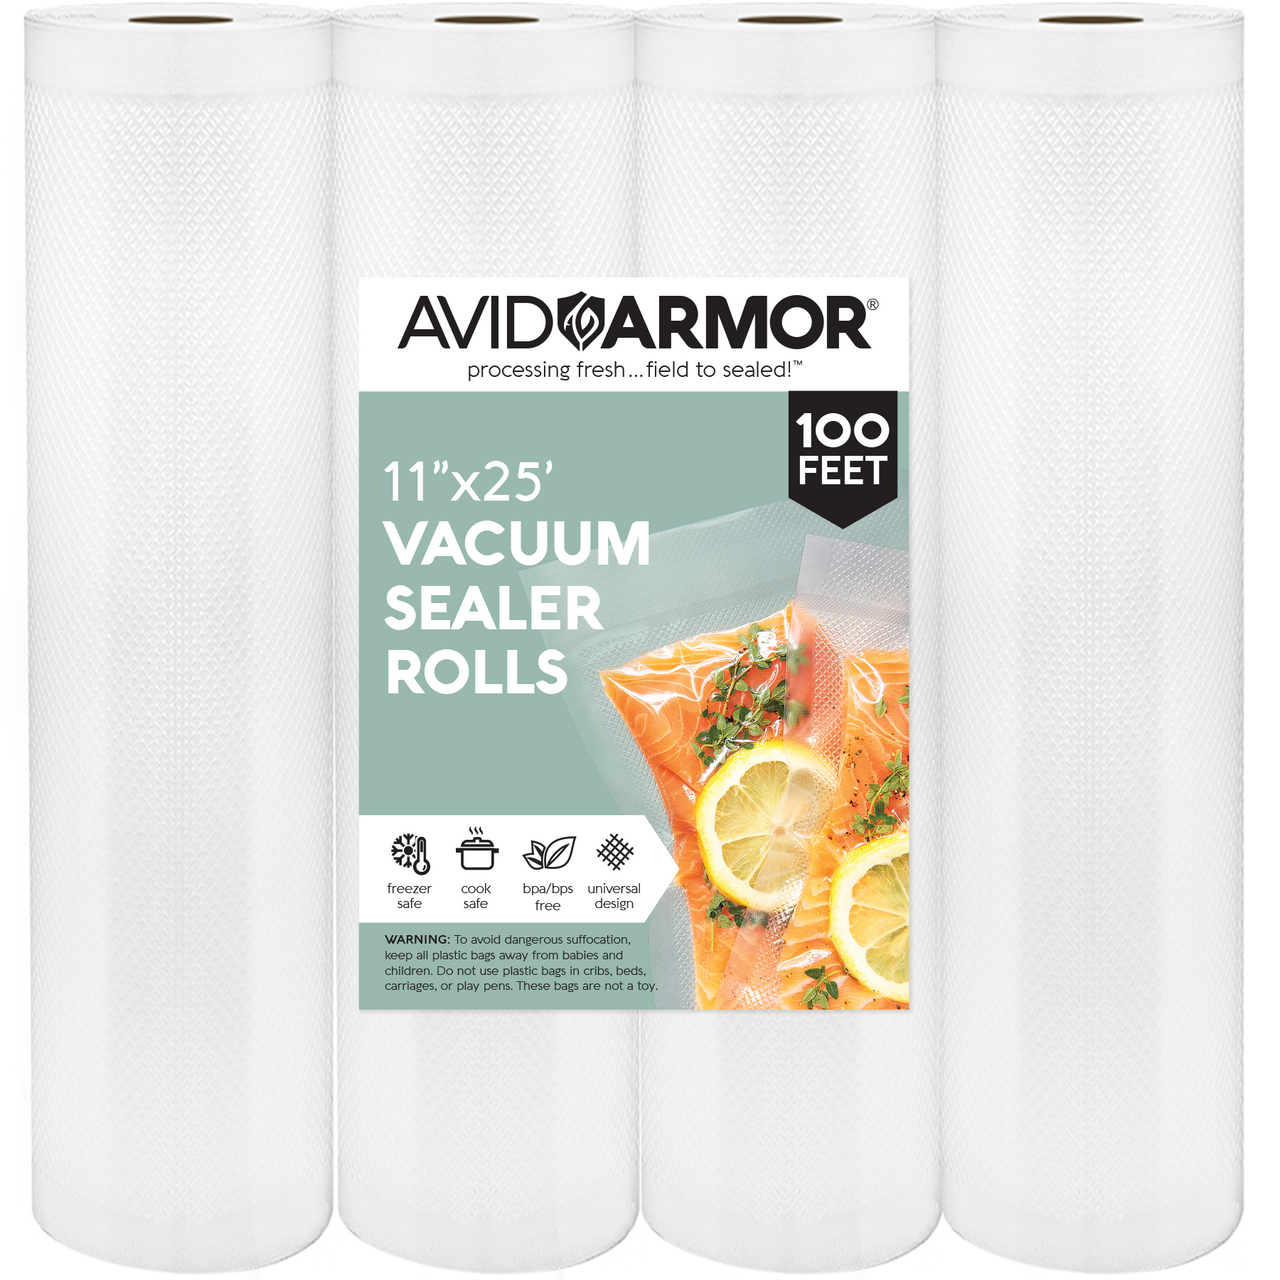 Avid Armor Vacuum Sealer Bags 11x50 Rolls 2 Pack for Food Saver, Seal a Meal  Vacuum Sealers Heavy Duty, BPA Free, Sous Vide Safe, Cut to Size Vacuum  Storage Bags, Universal Design